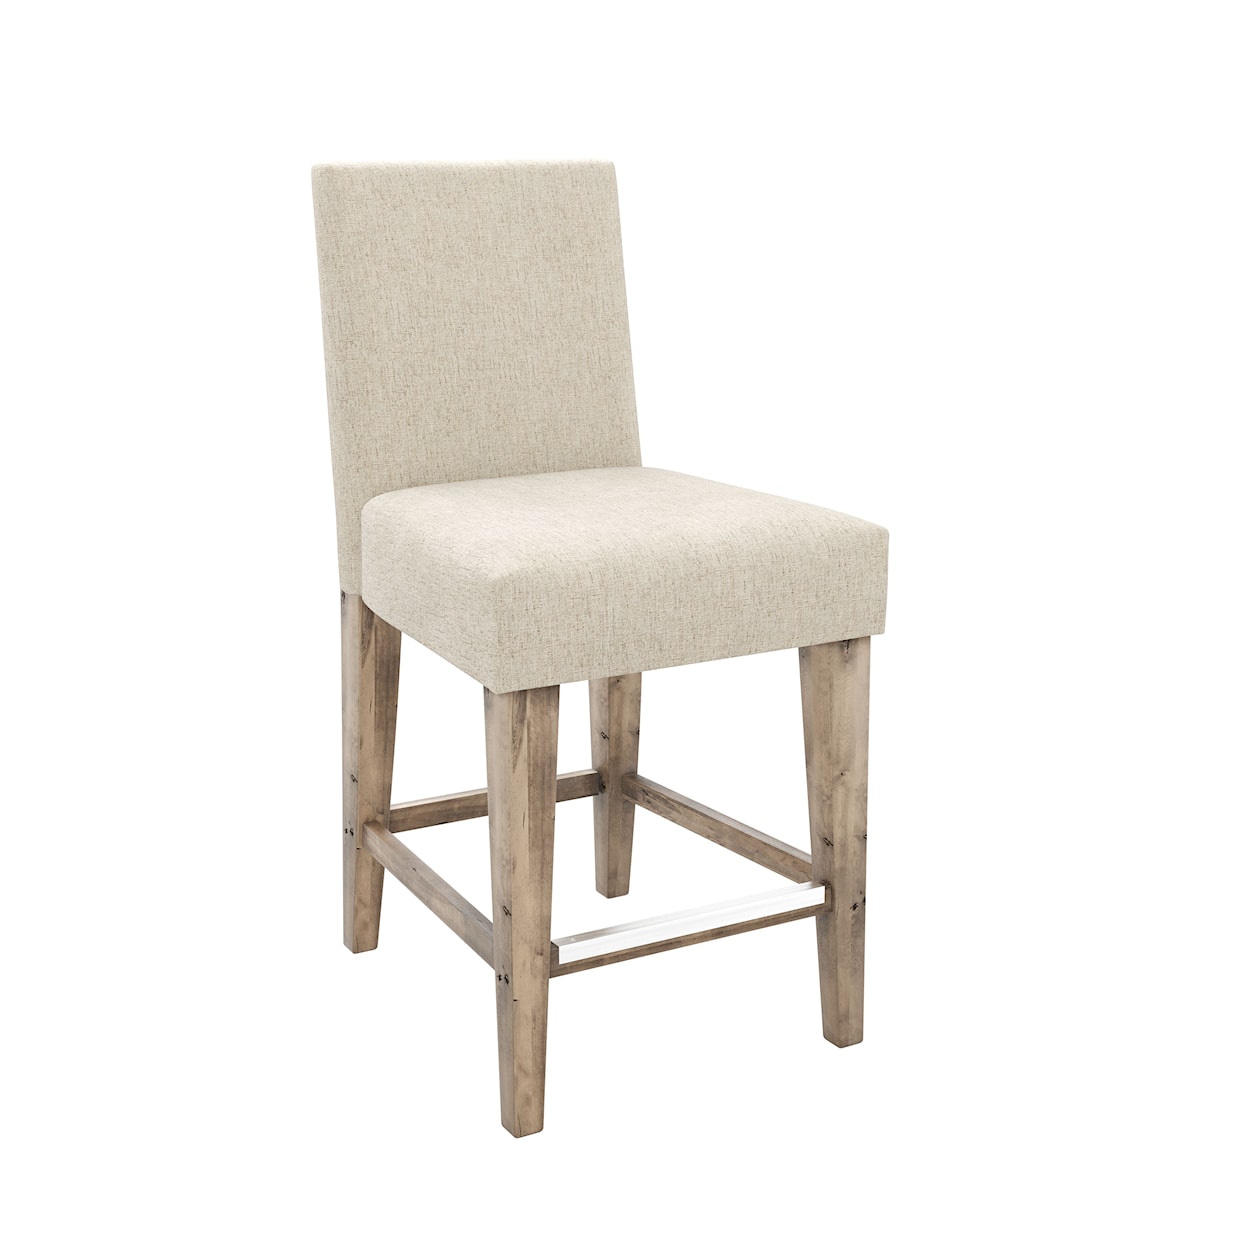 Canadel East Side 24" Upholstered Fixed Stool